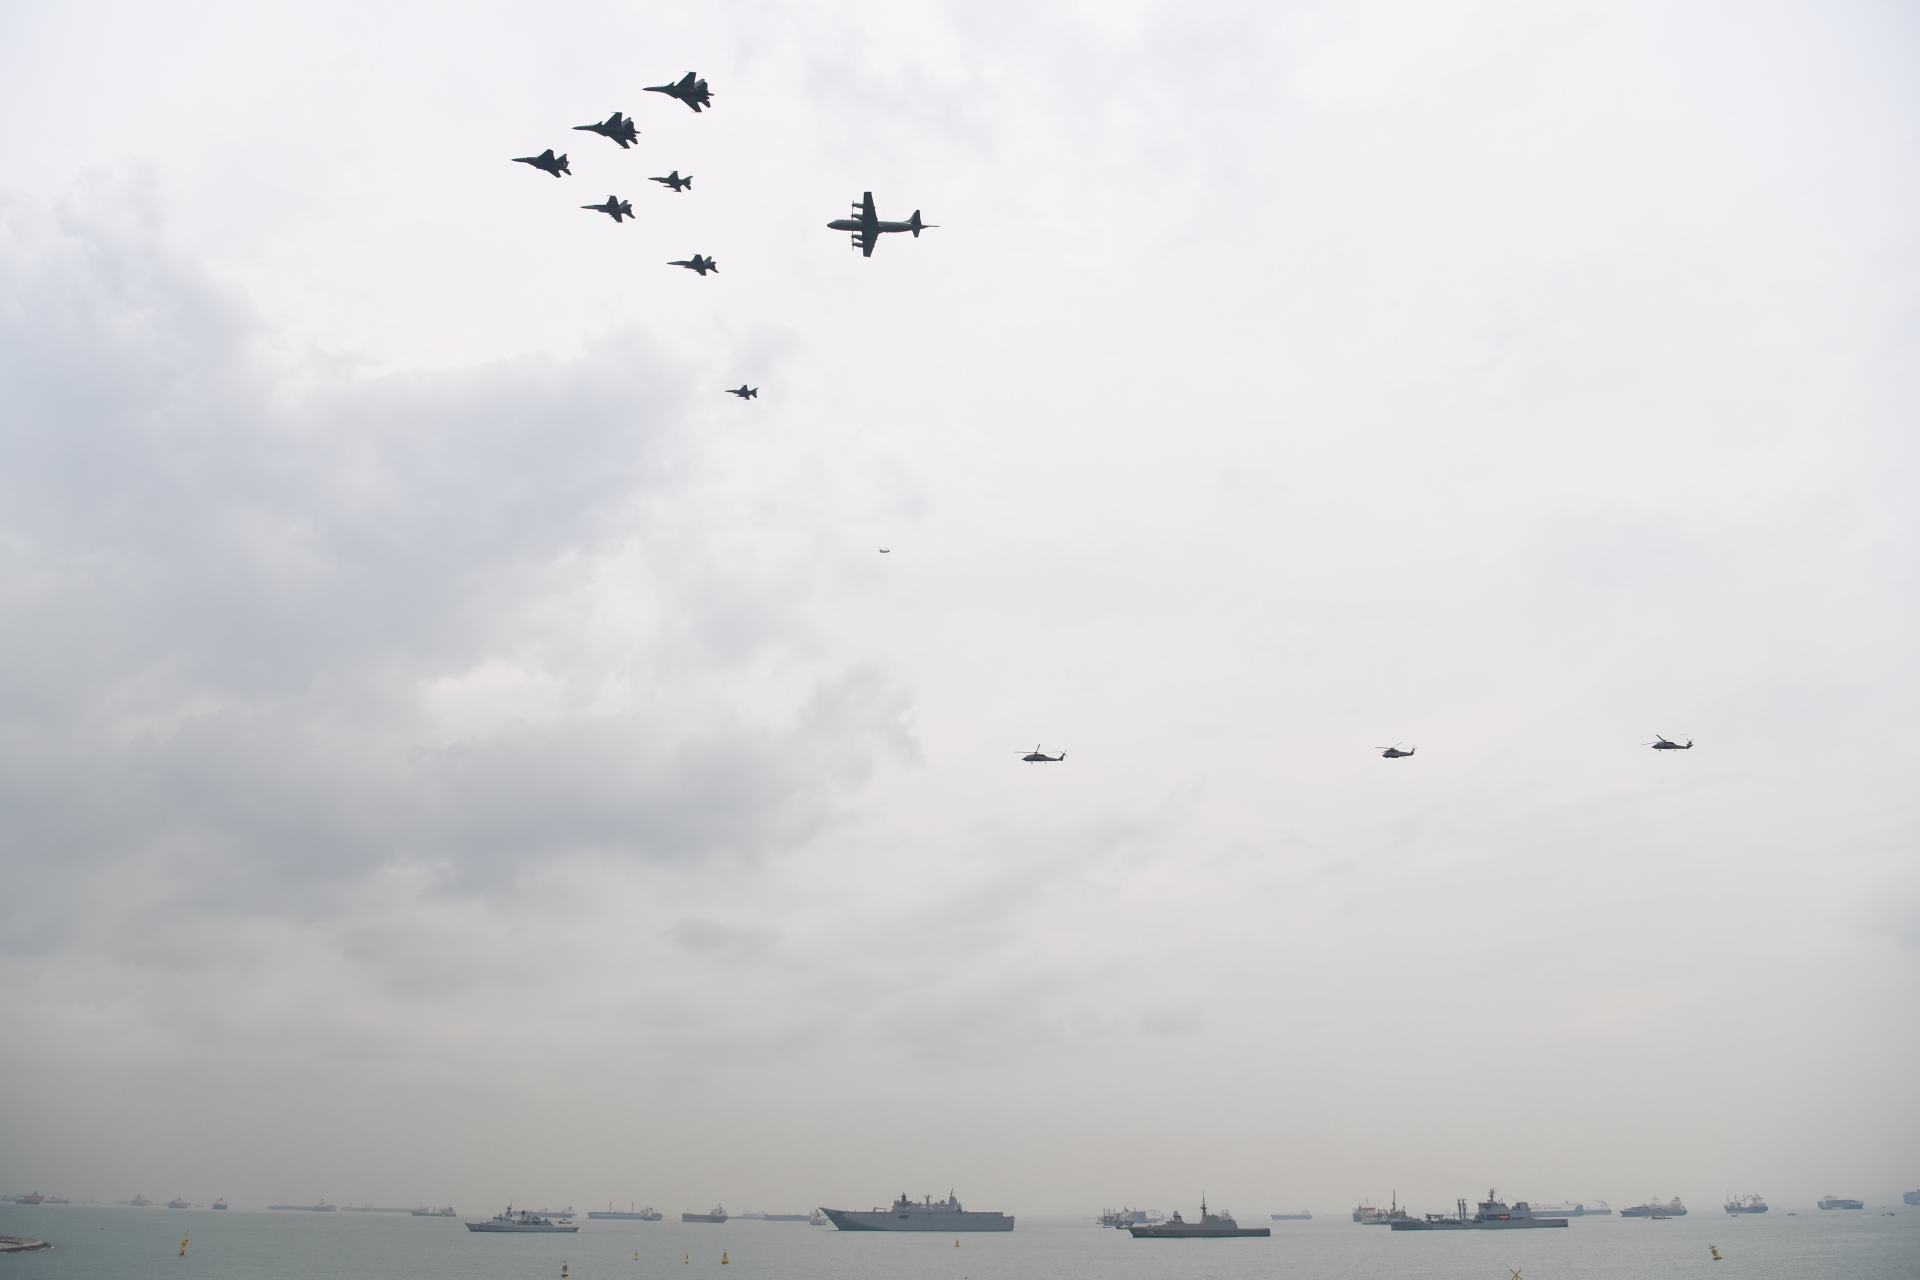 Assets from the FPDA50 flypast and naval vessel display at Marina Barrage this afternoon. 